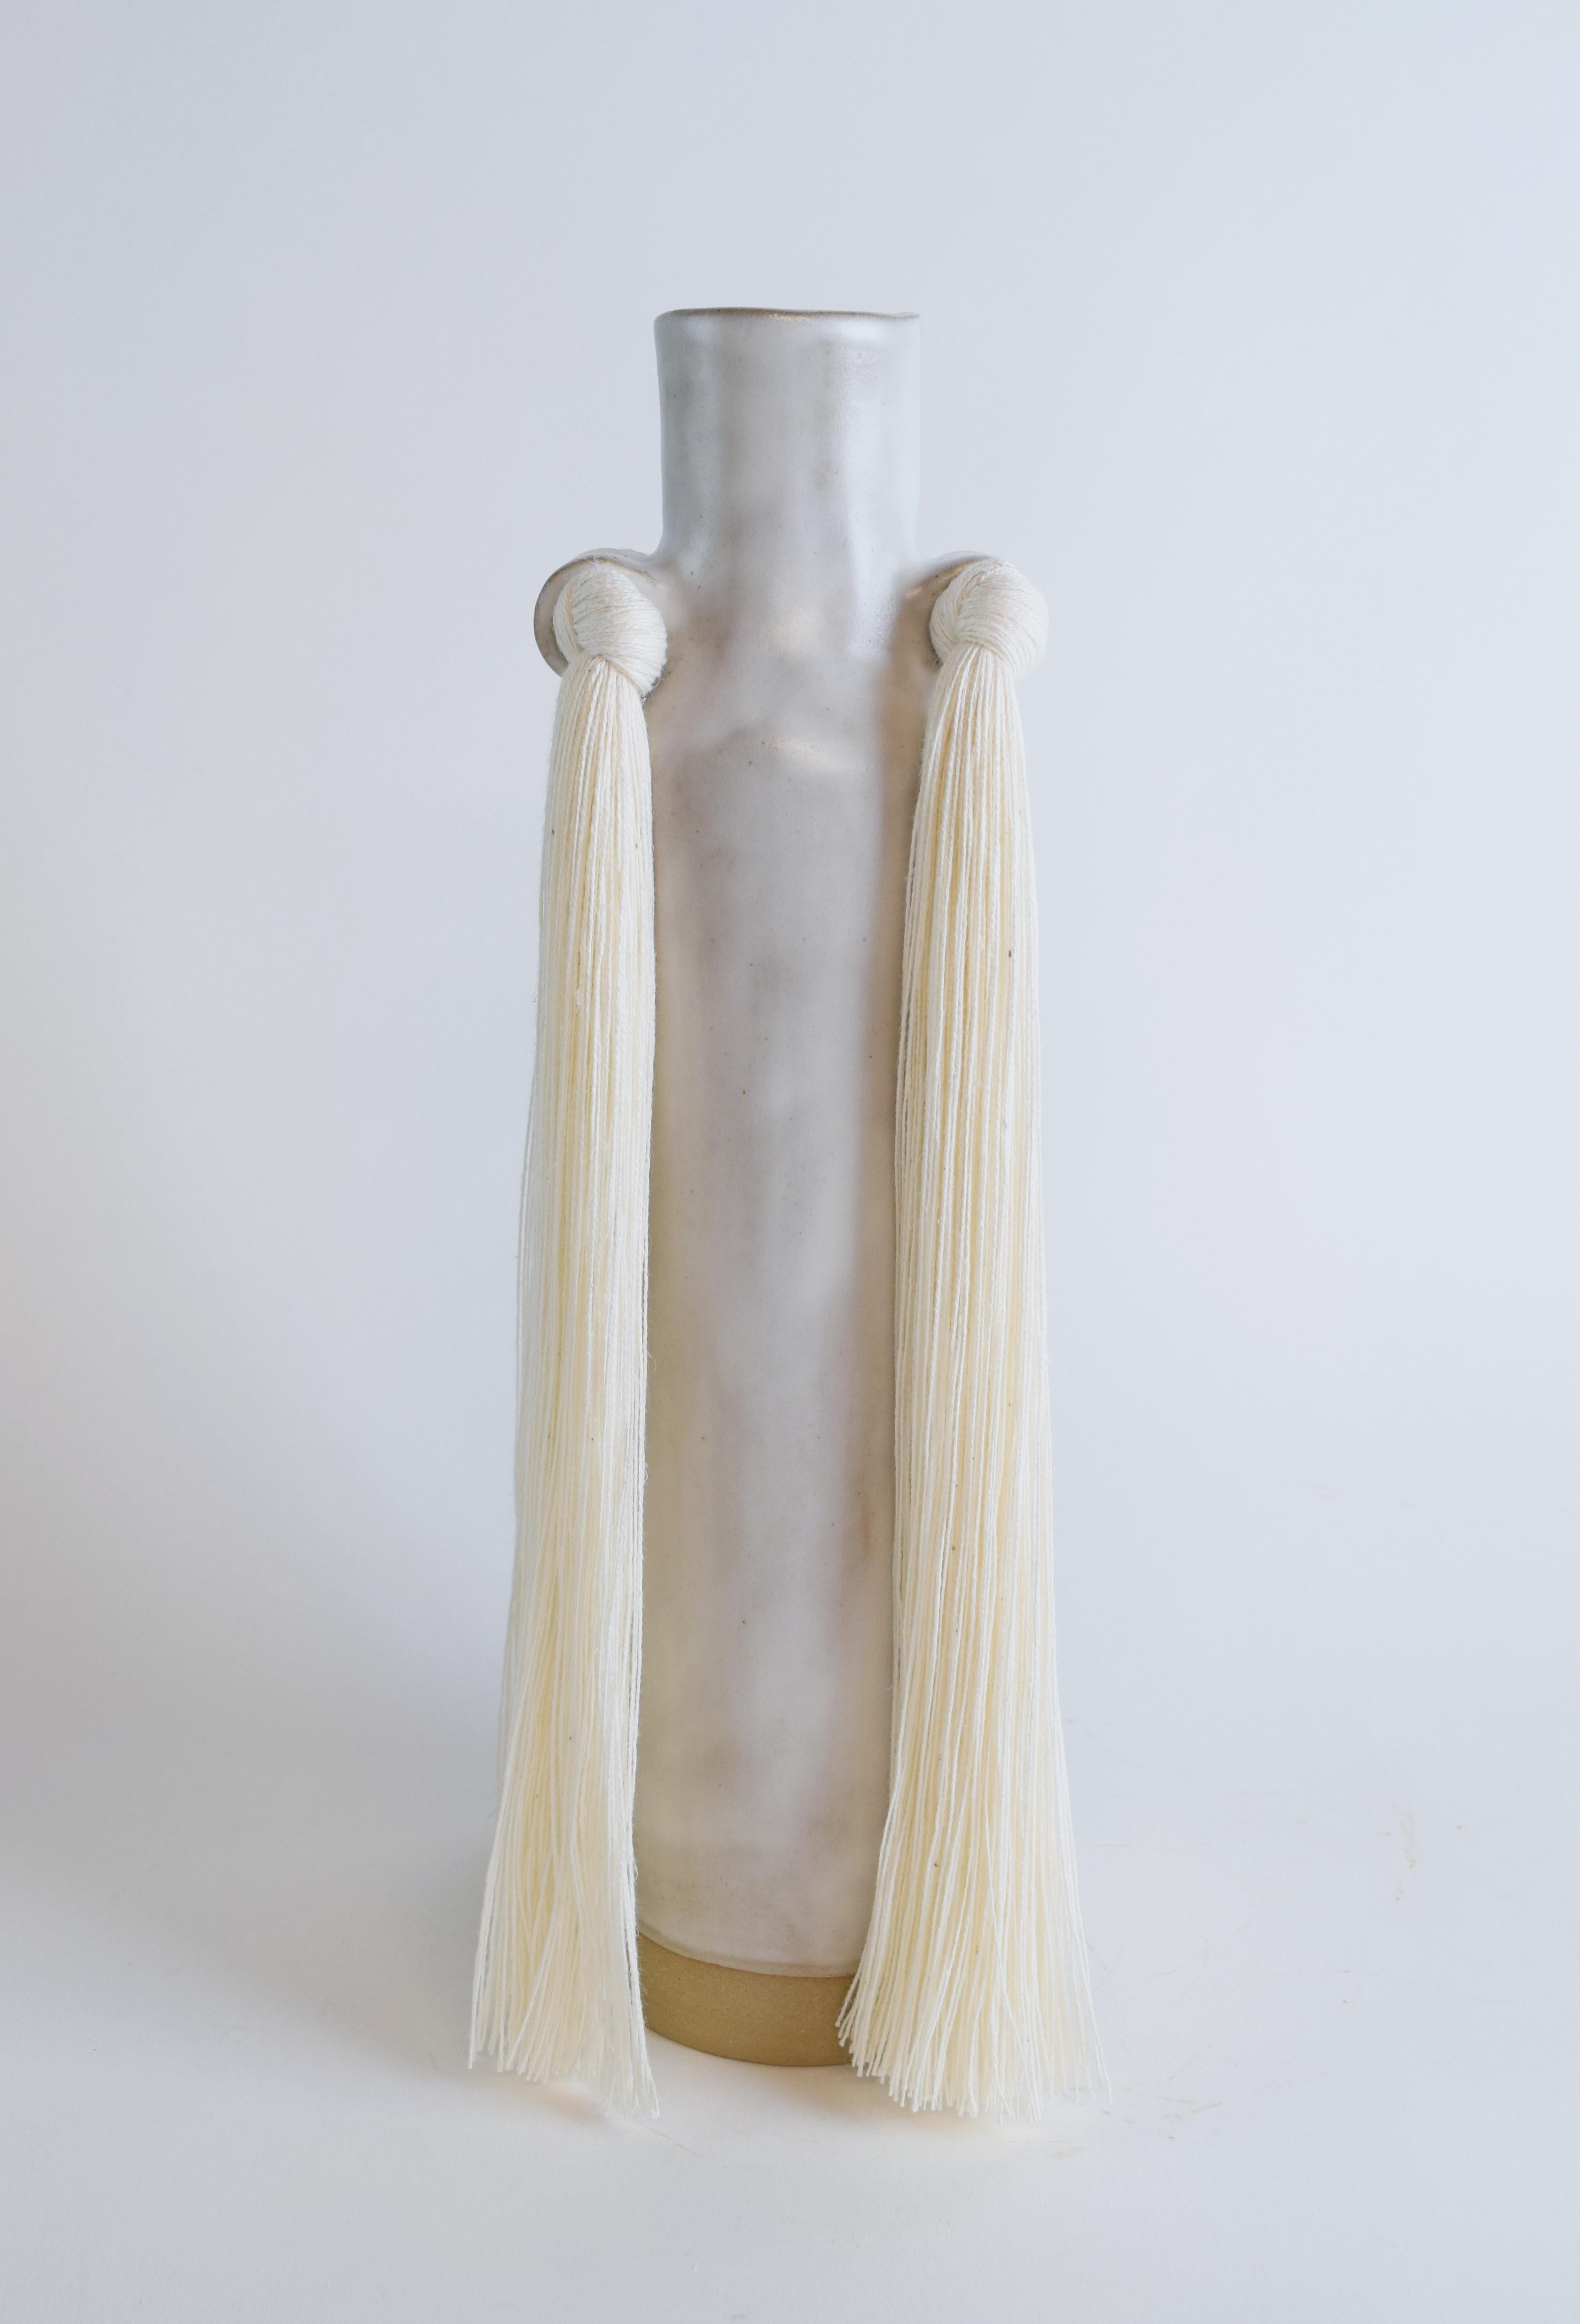 Vase #703 by Karen Gayle Tinney

Drawing on signature details from other Standard Collection pieces, this vase is an update to a traditional bottle neck silhouette. 

Hand formed beige stoneware with satin white glaze. white cotton fringe detail.